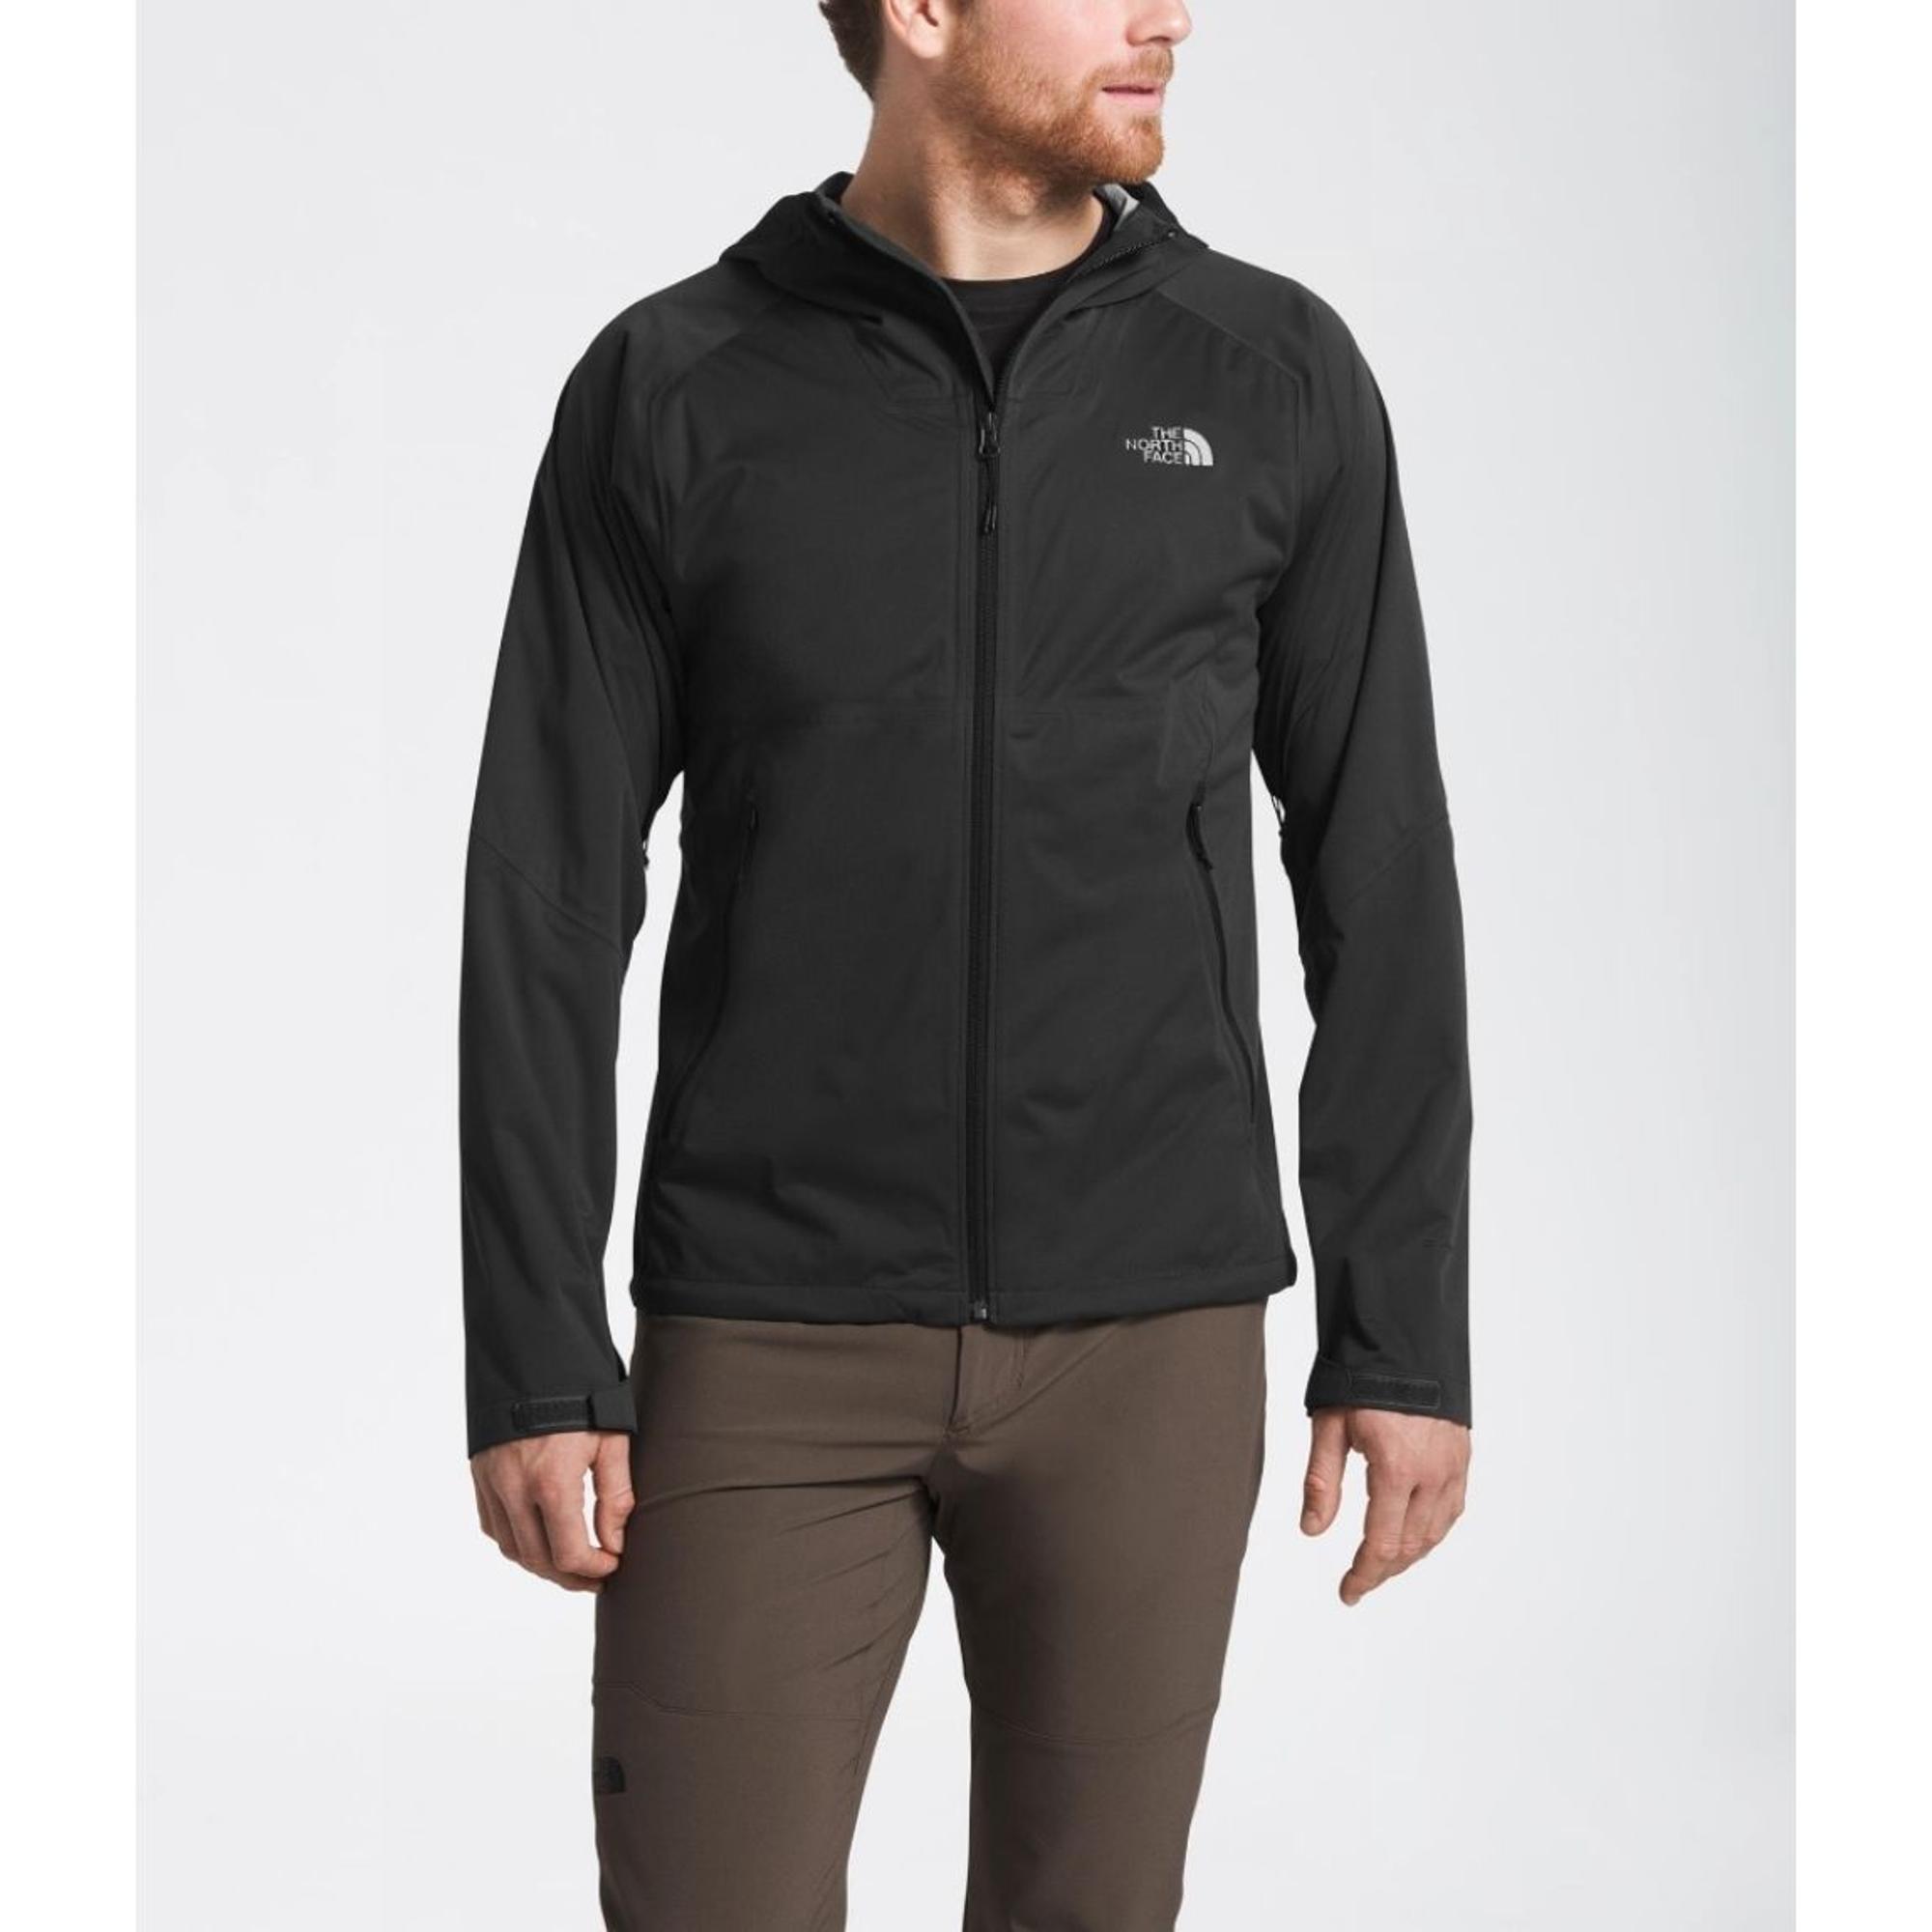 Allproof Stretch Jacket